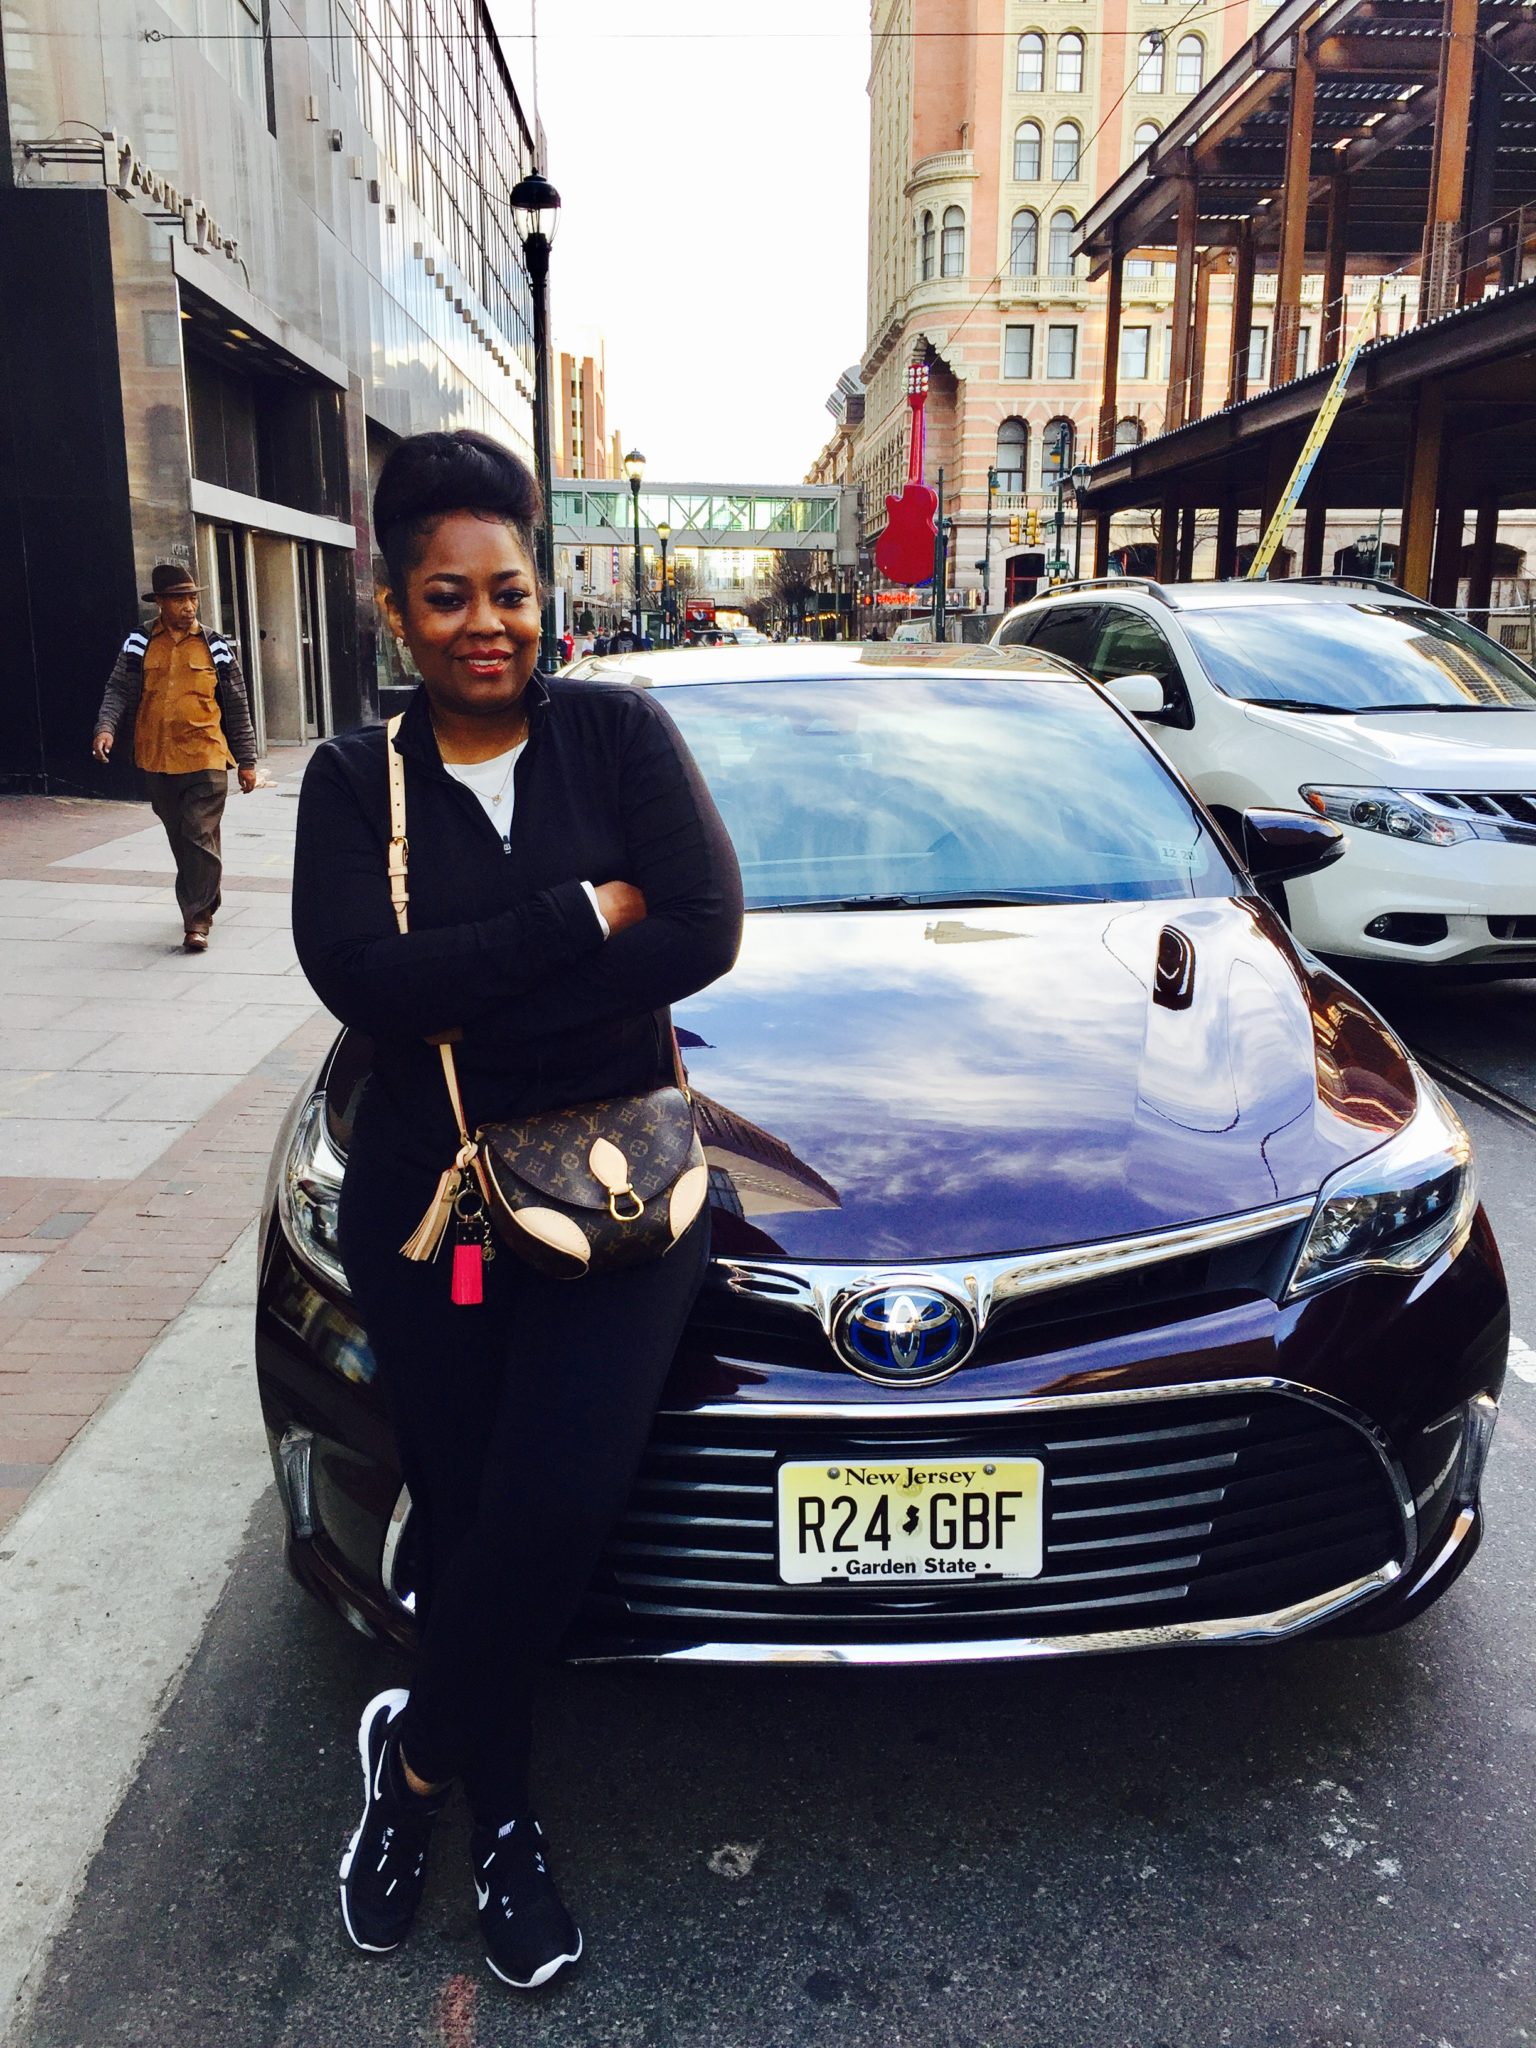 Black History Road Trip With Toyota, What An Experience!